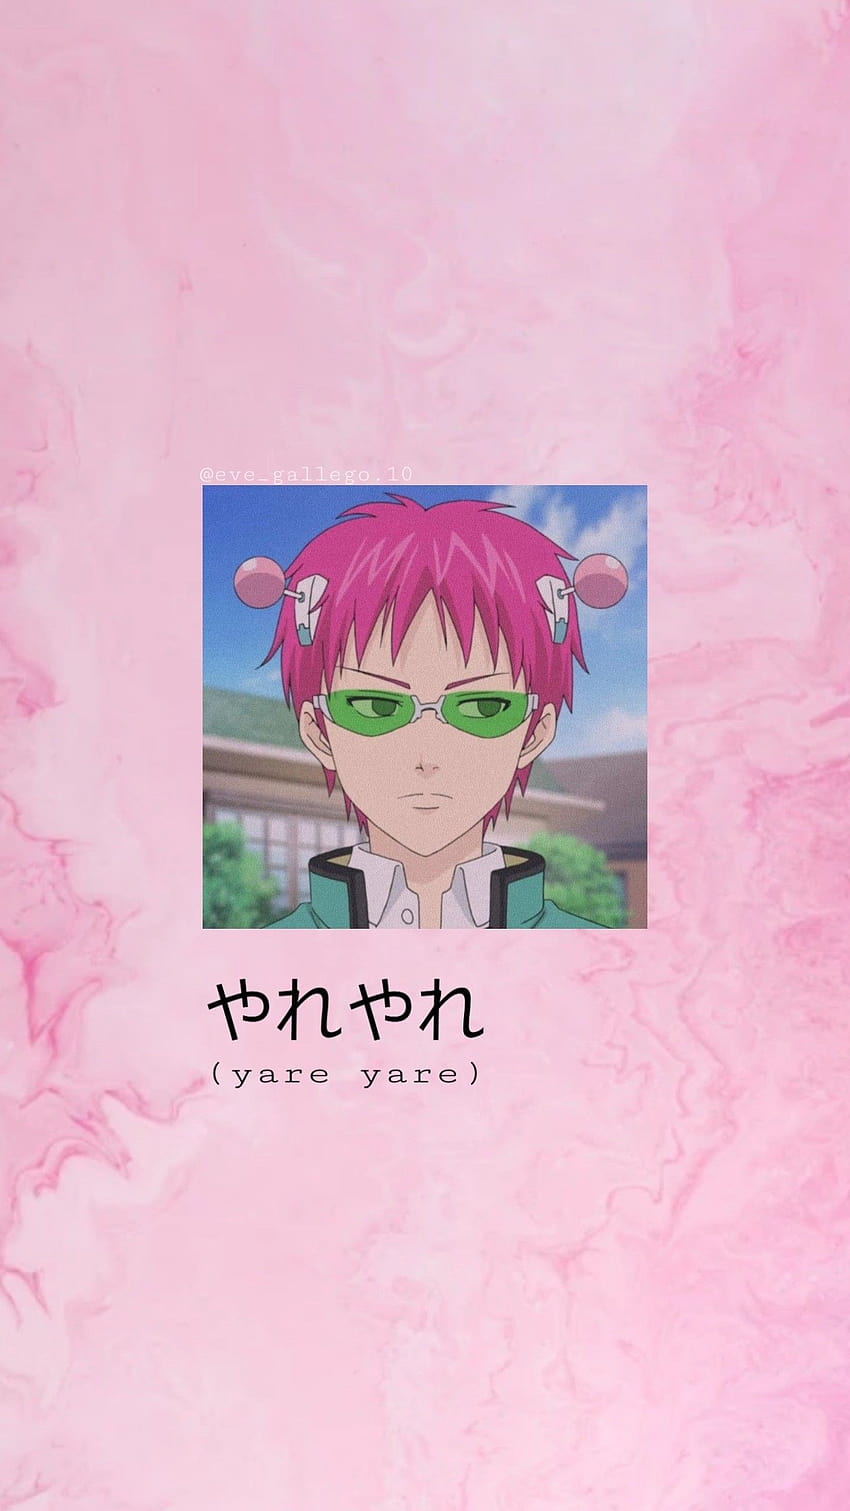 Saiki Kusuo Wallpaper iPhone Android and Desktop  Page 4 of 9  The  RamenSwag